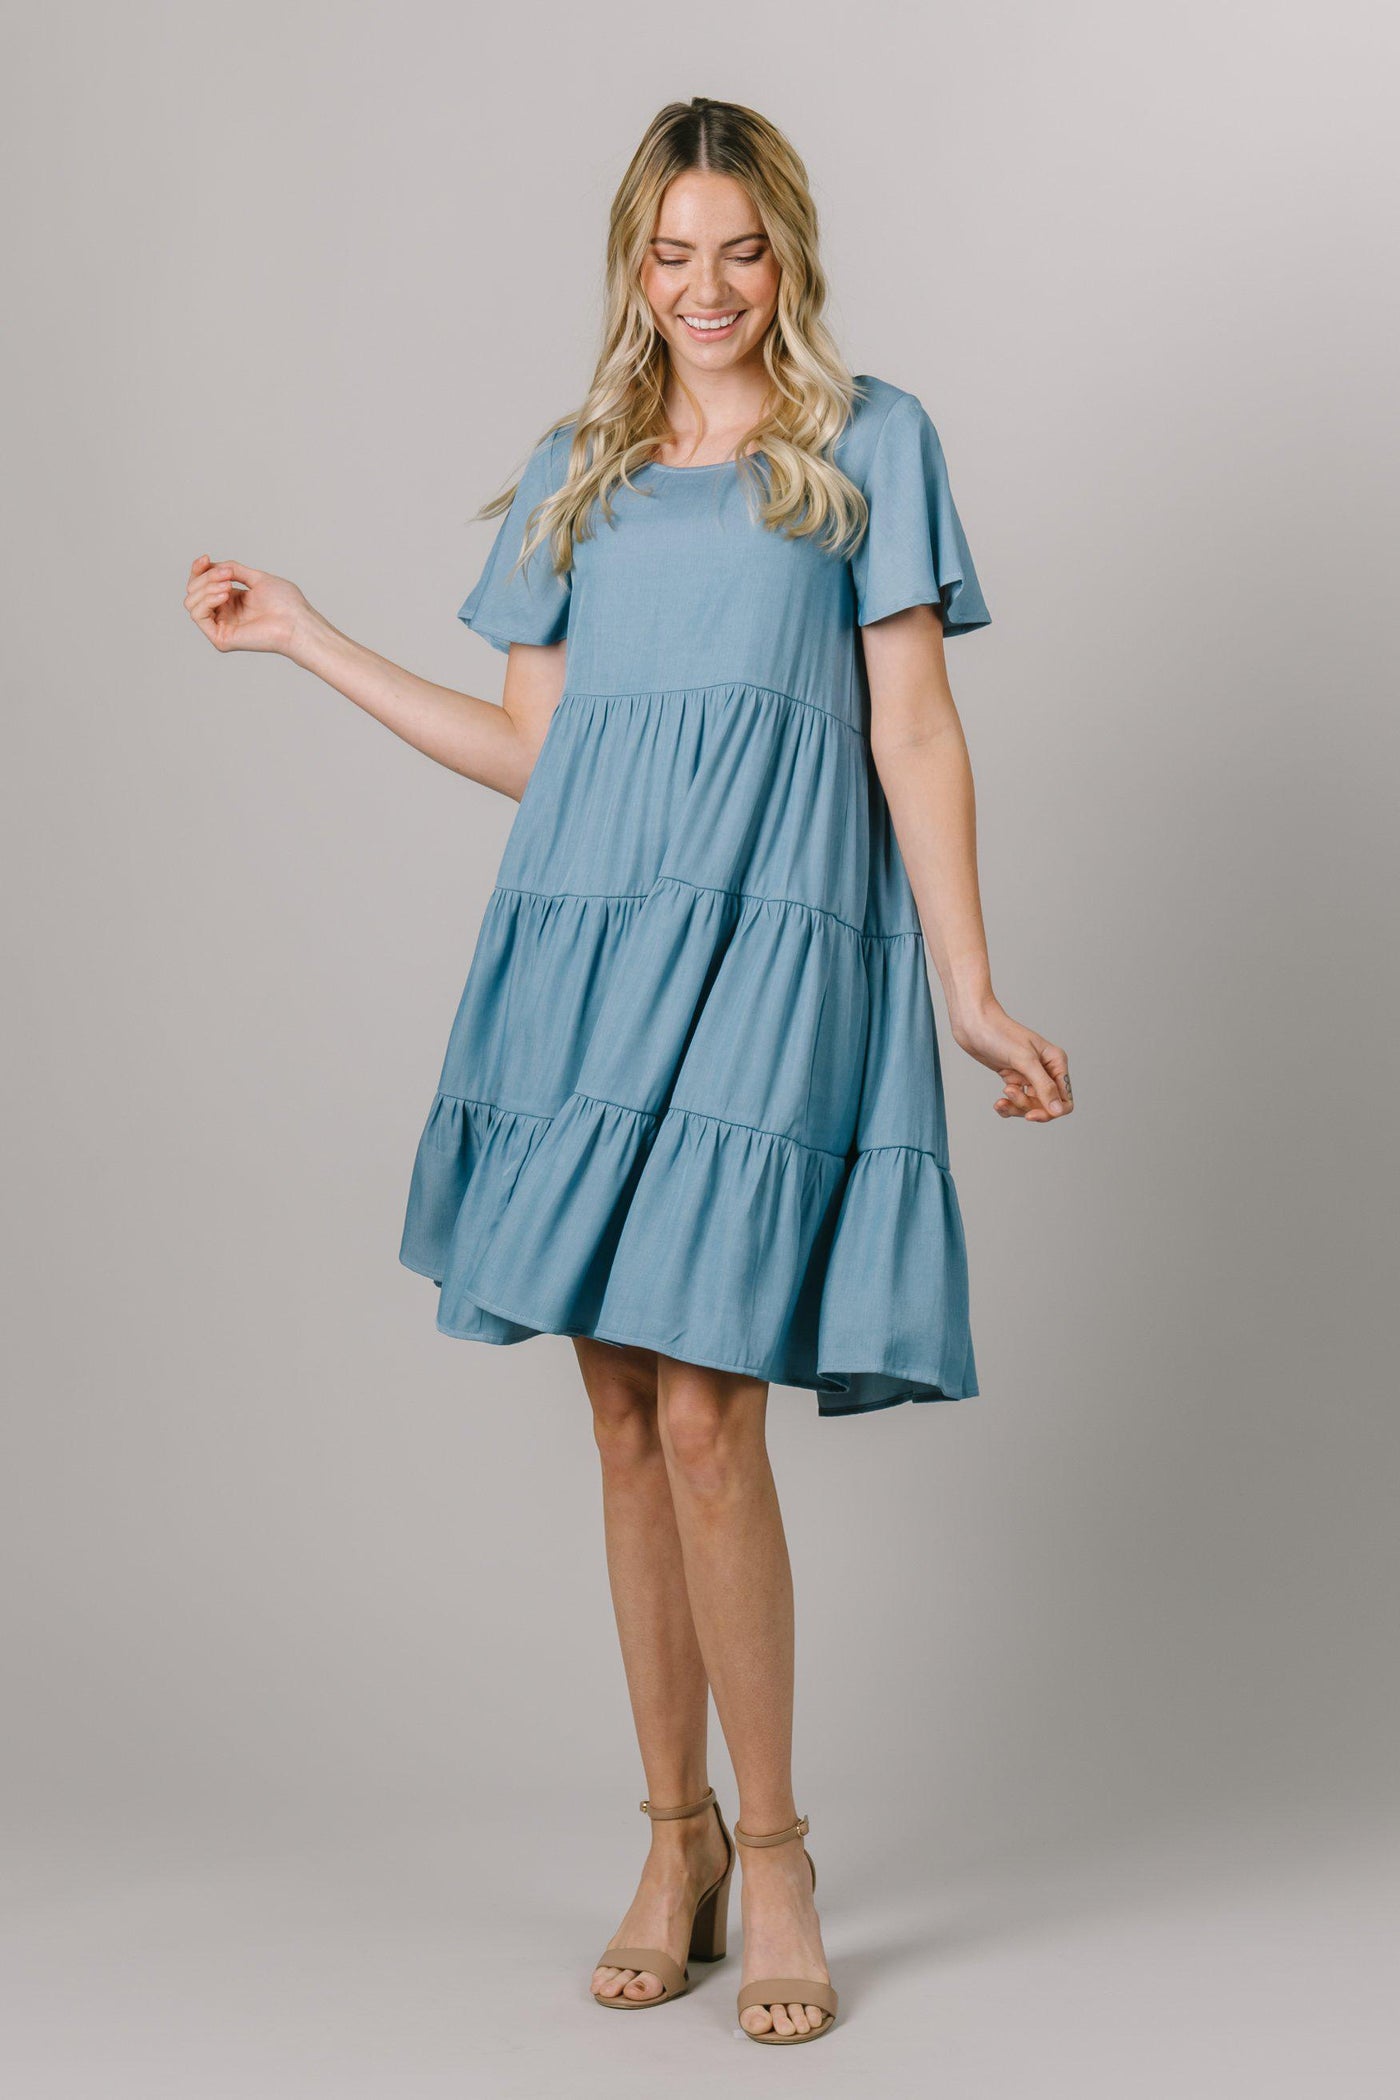 We're obsessed with this tiered modest dress that features flutter sleeves and a round neckline. - Modest Clothing - Modest Dresses - Modest Everyday Dresses 